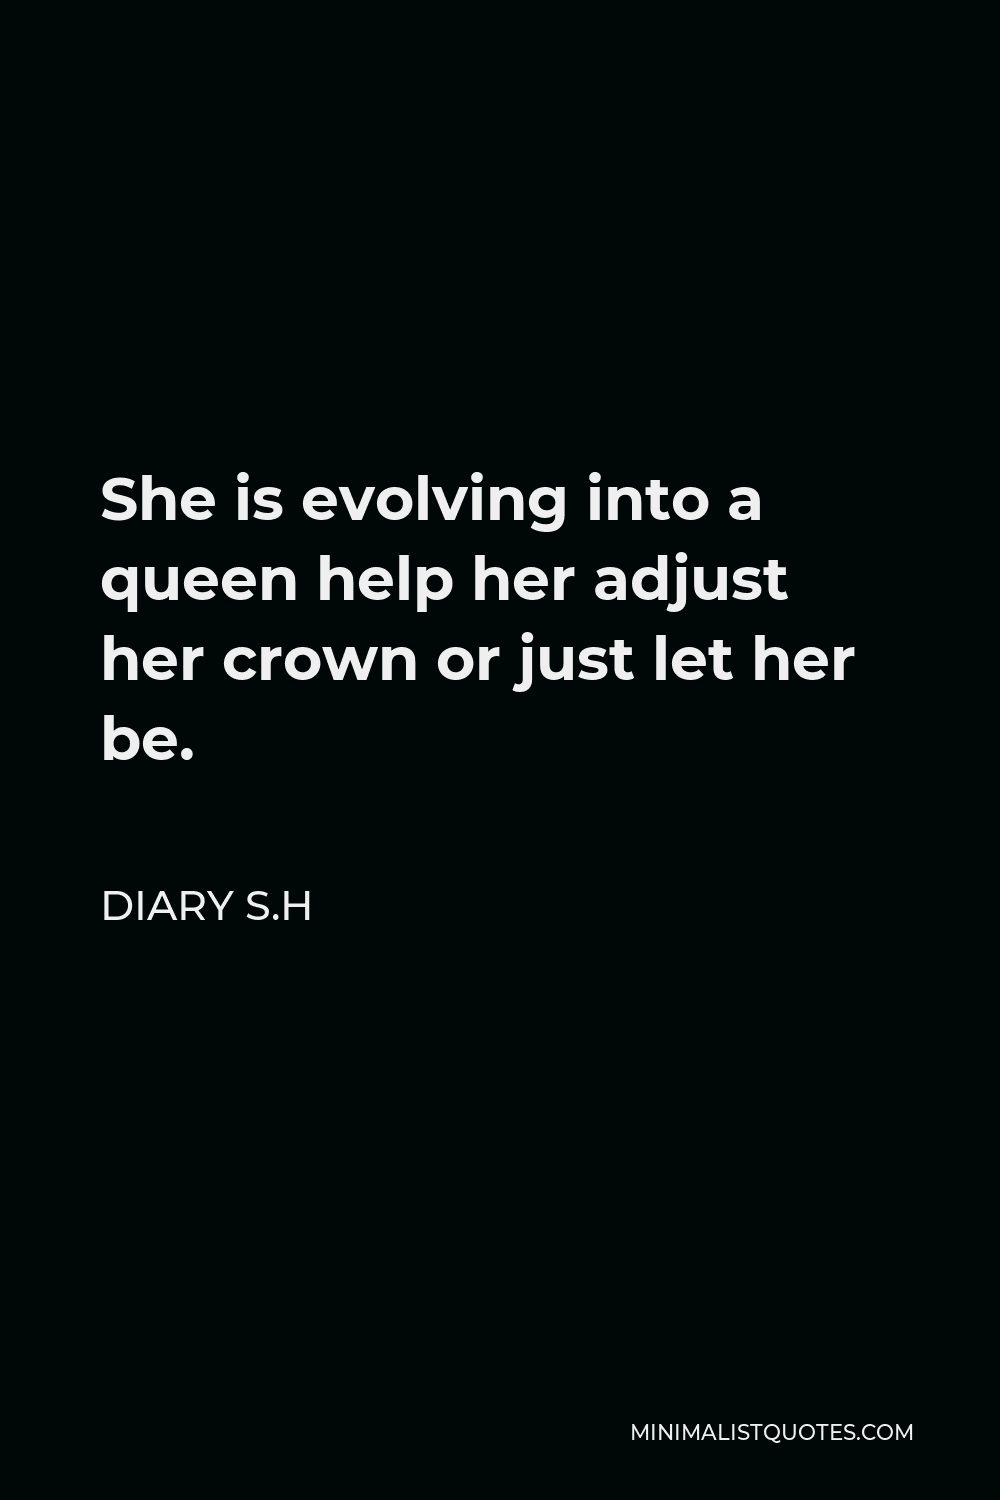 Diary S.H Quote - She is evolving into a queen help her adjust her crown or just let her be.